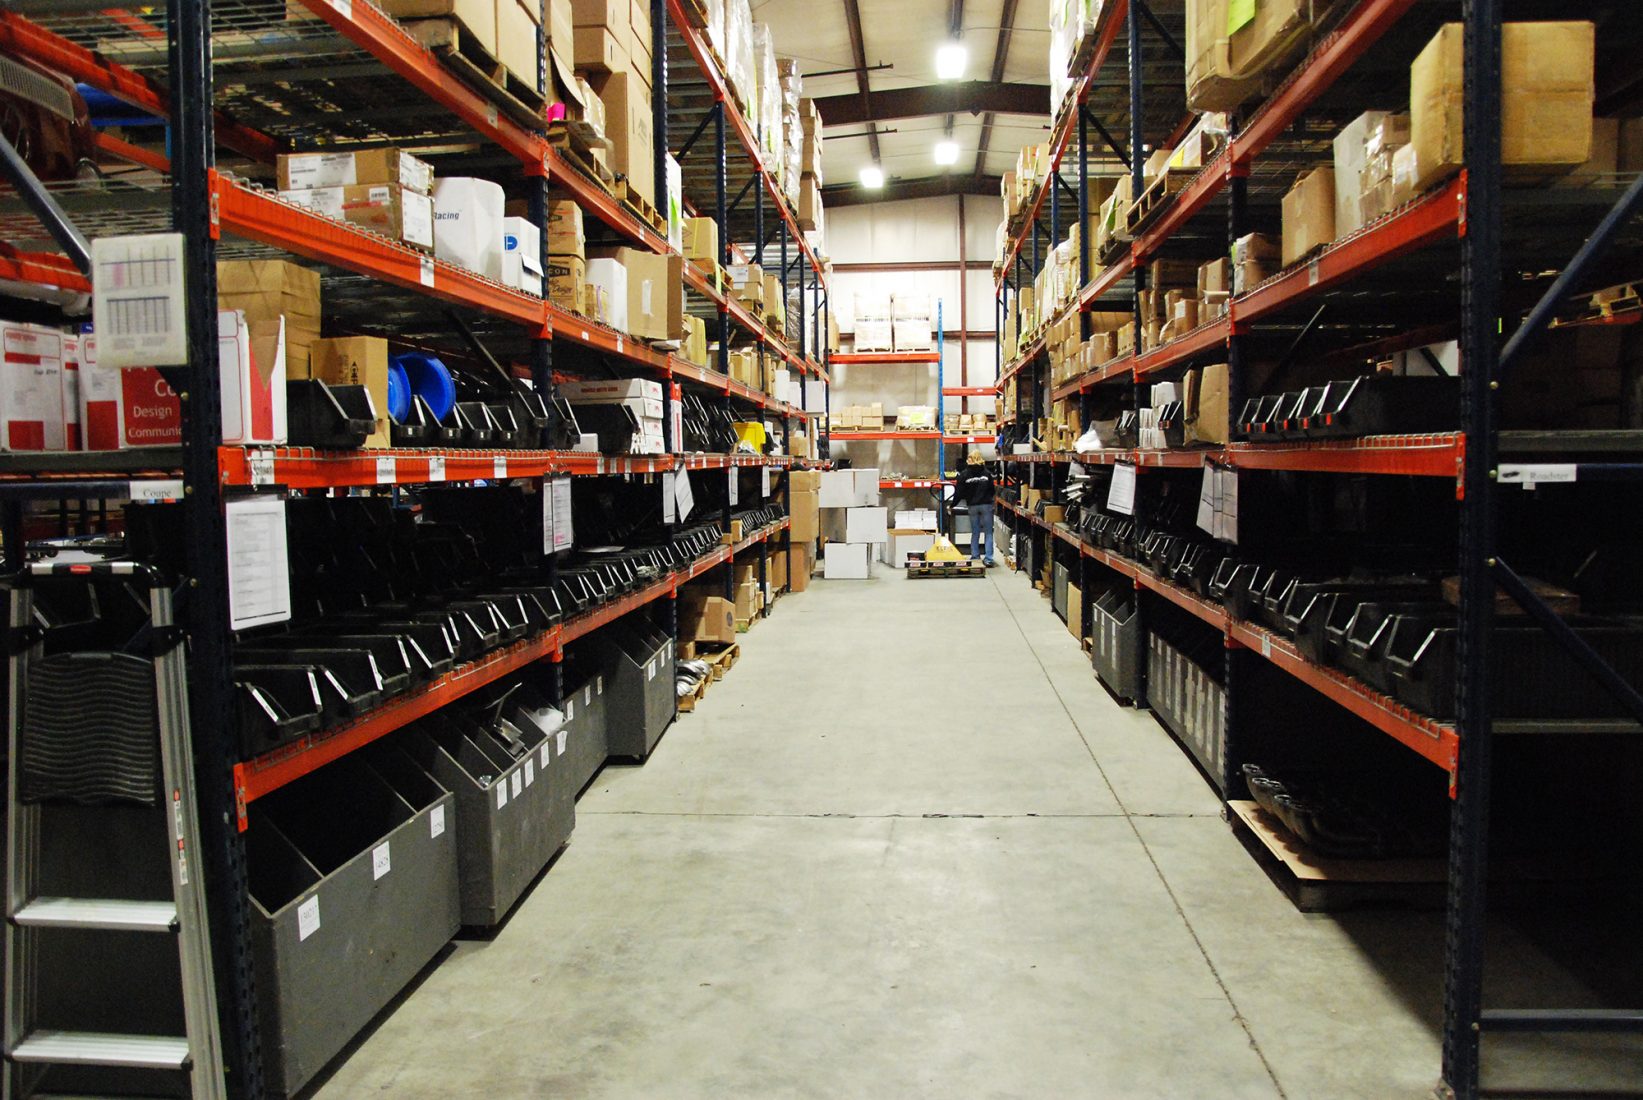 Our warehouse is well organized and over 4,500 SKUs have bar codes and specialized locations.